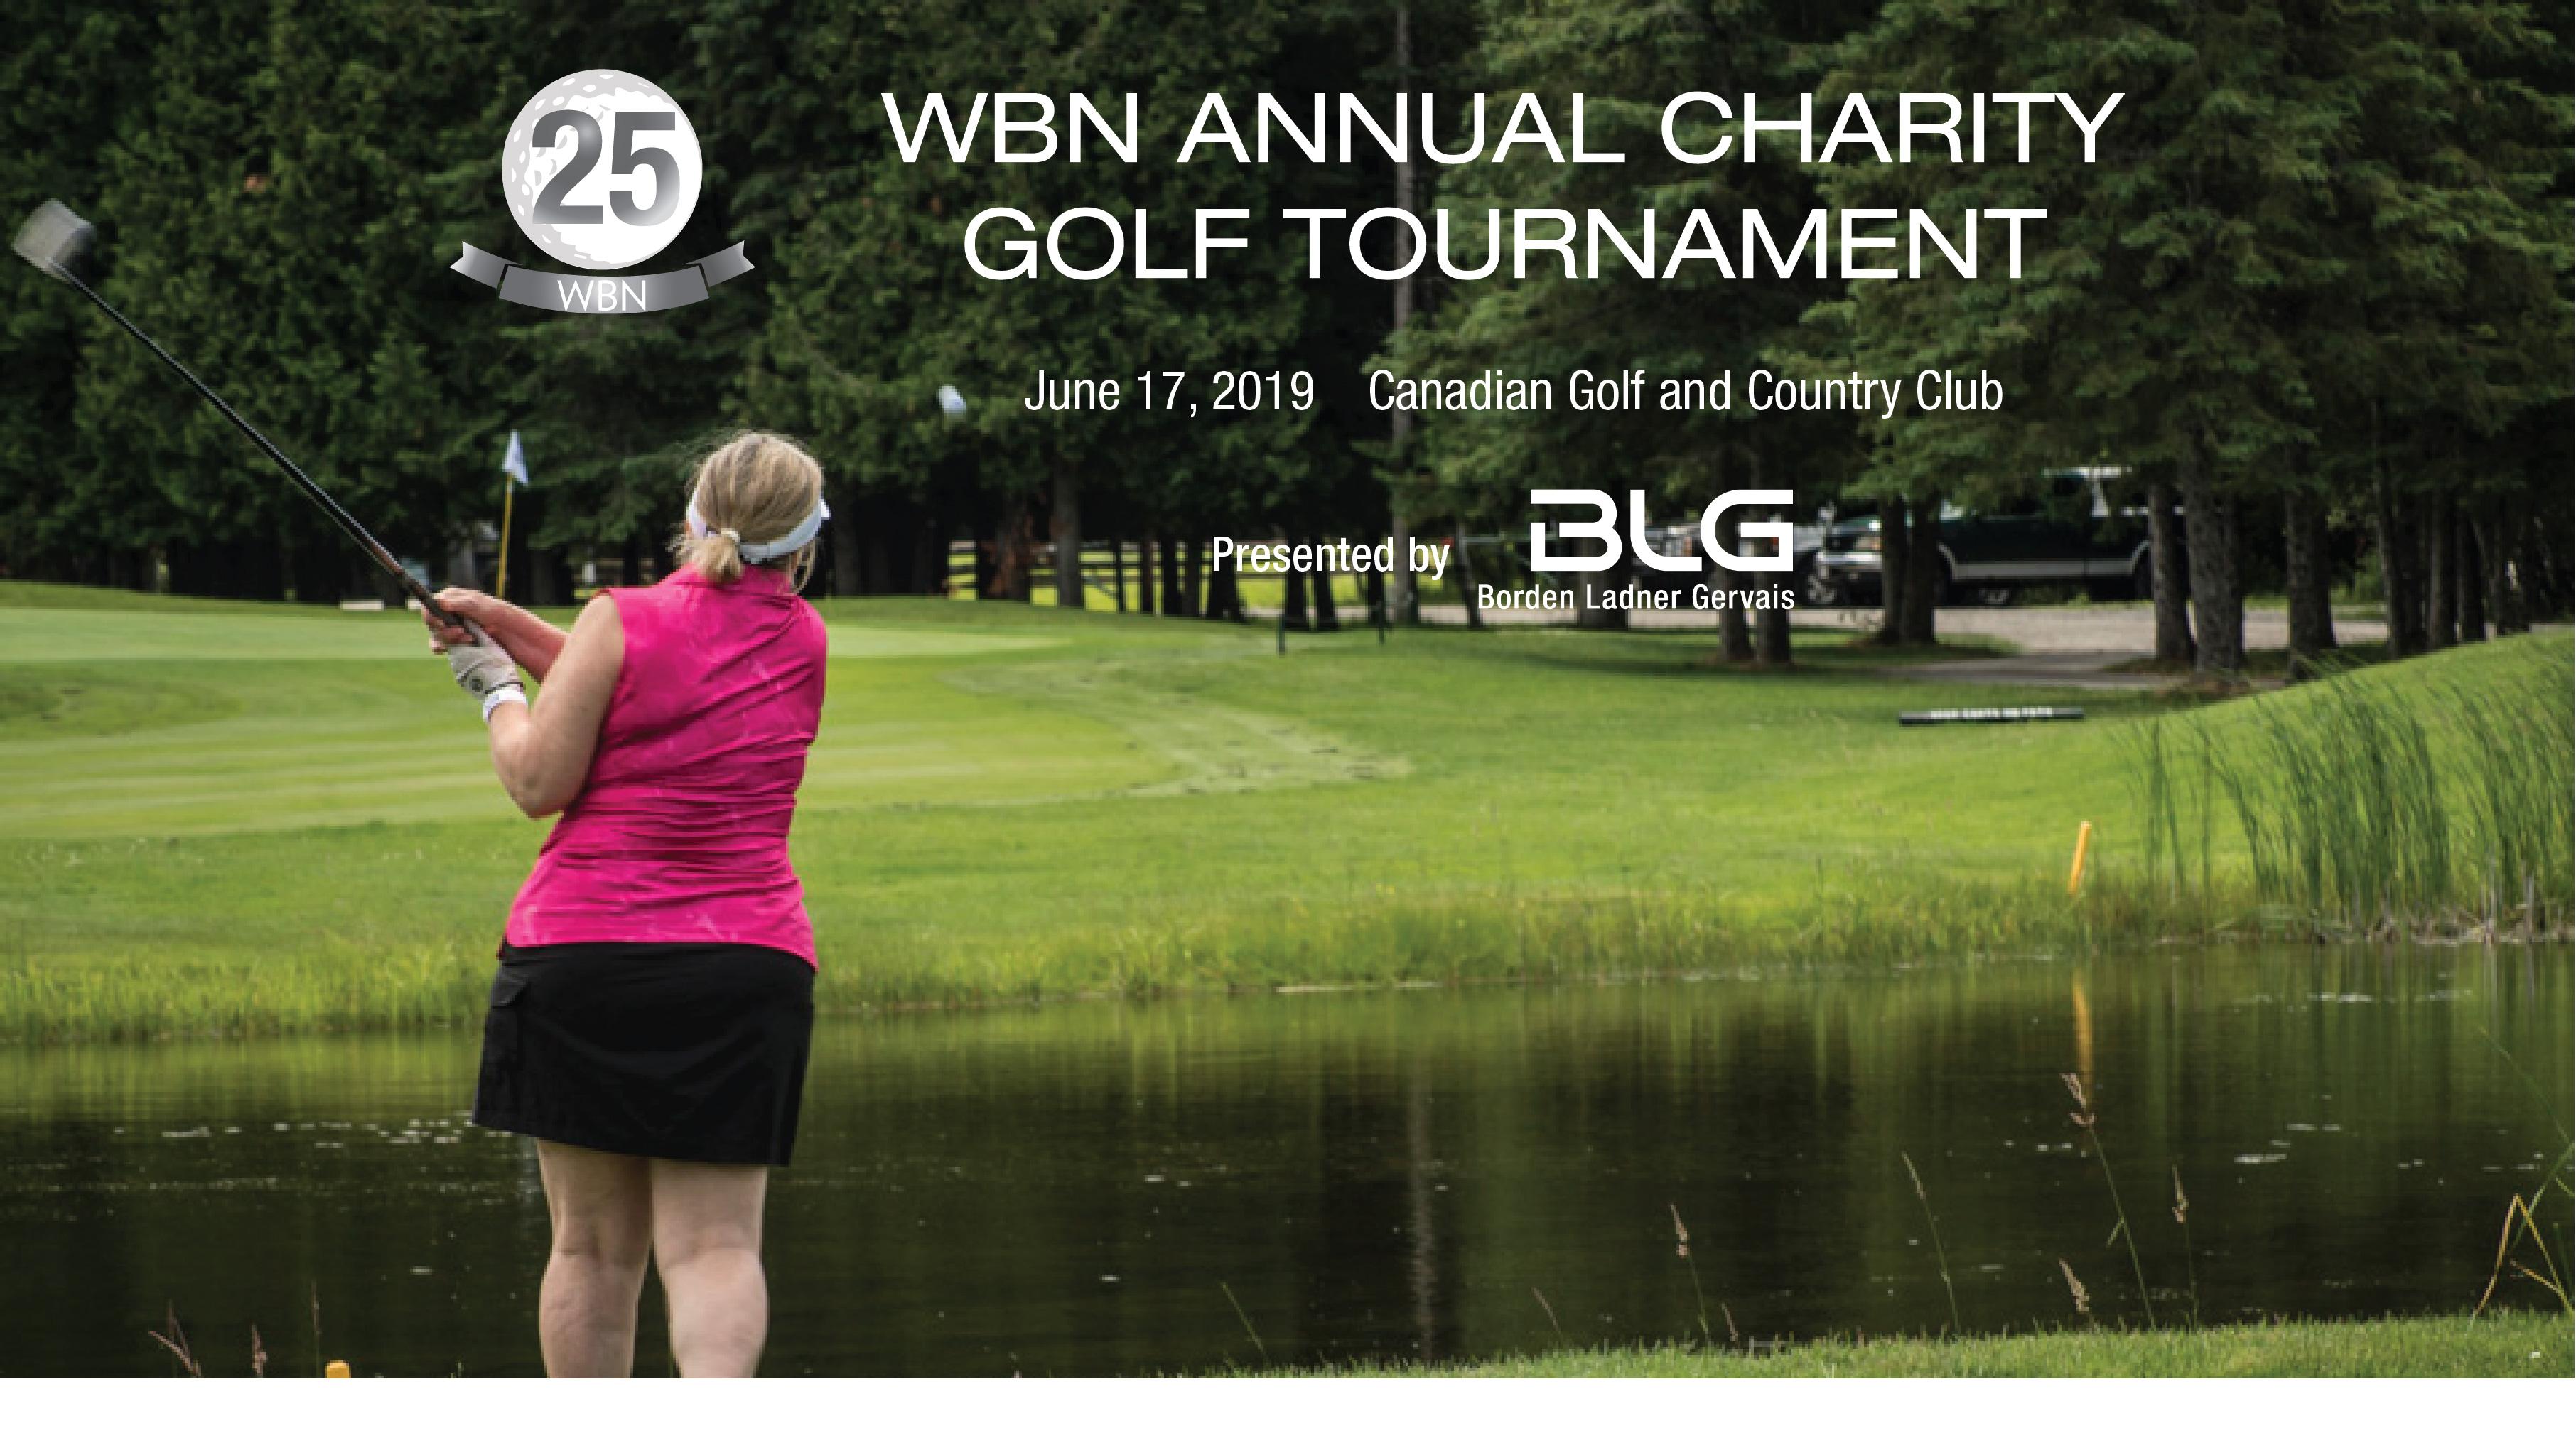 25th Annual WBN Charity Golf Tournament Presented by BLG